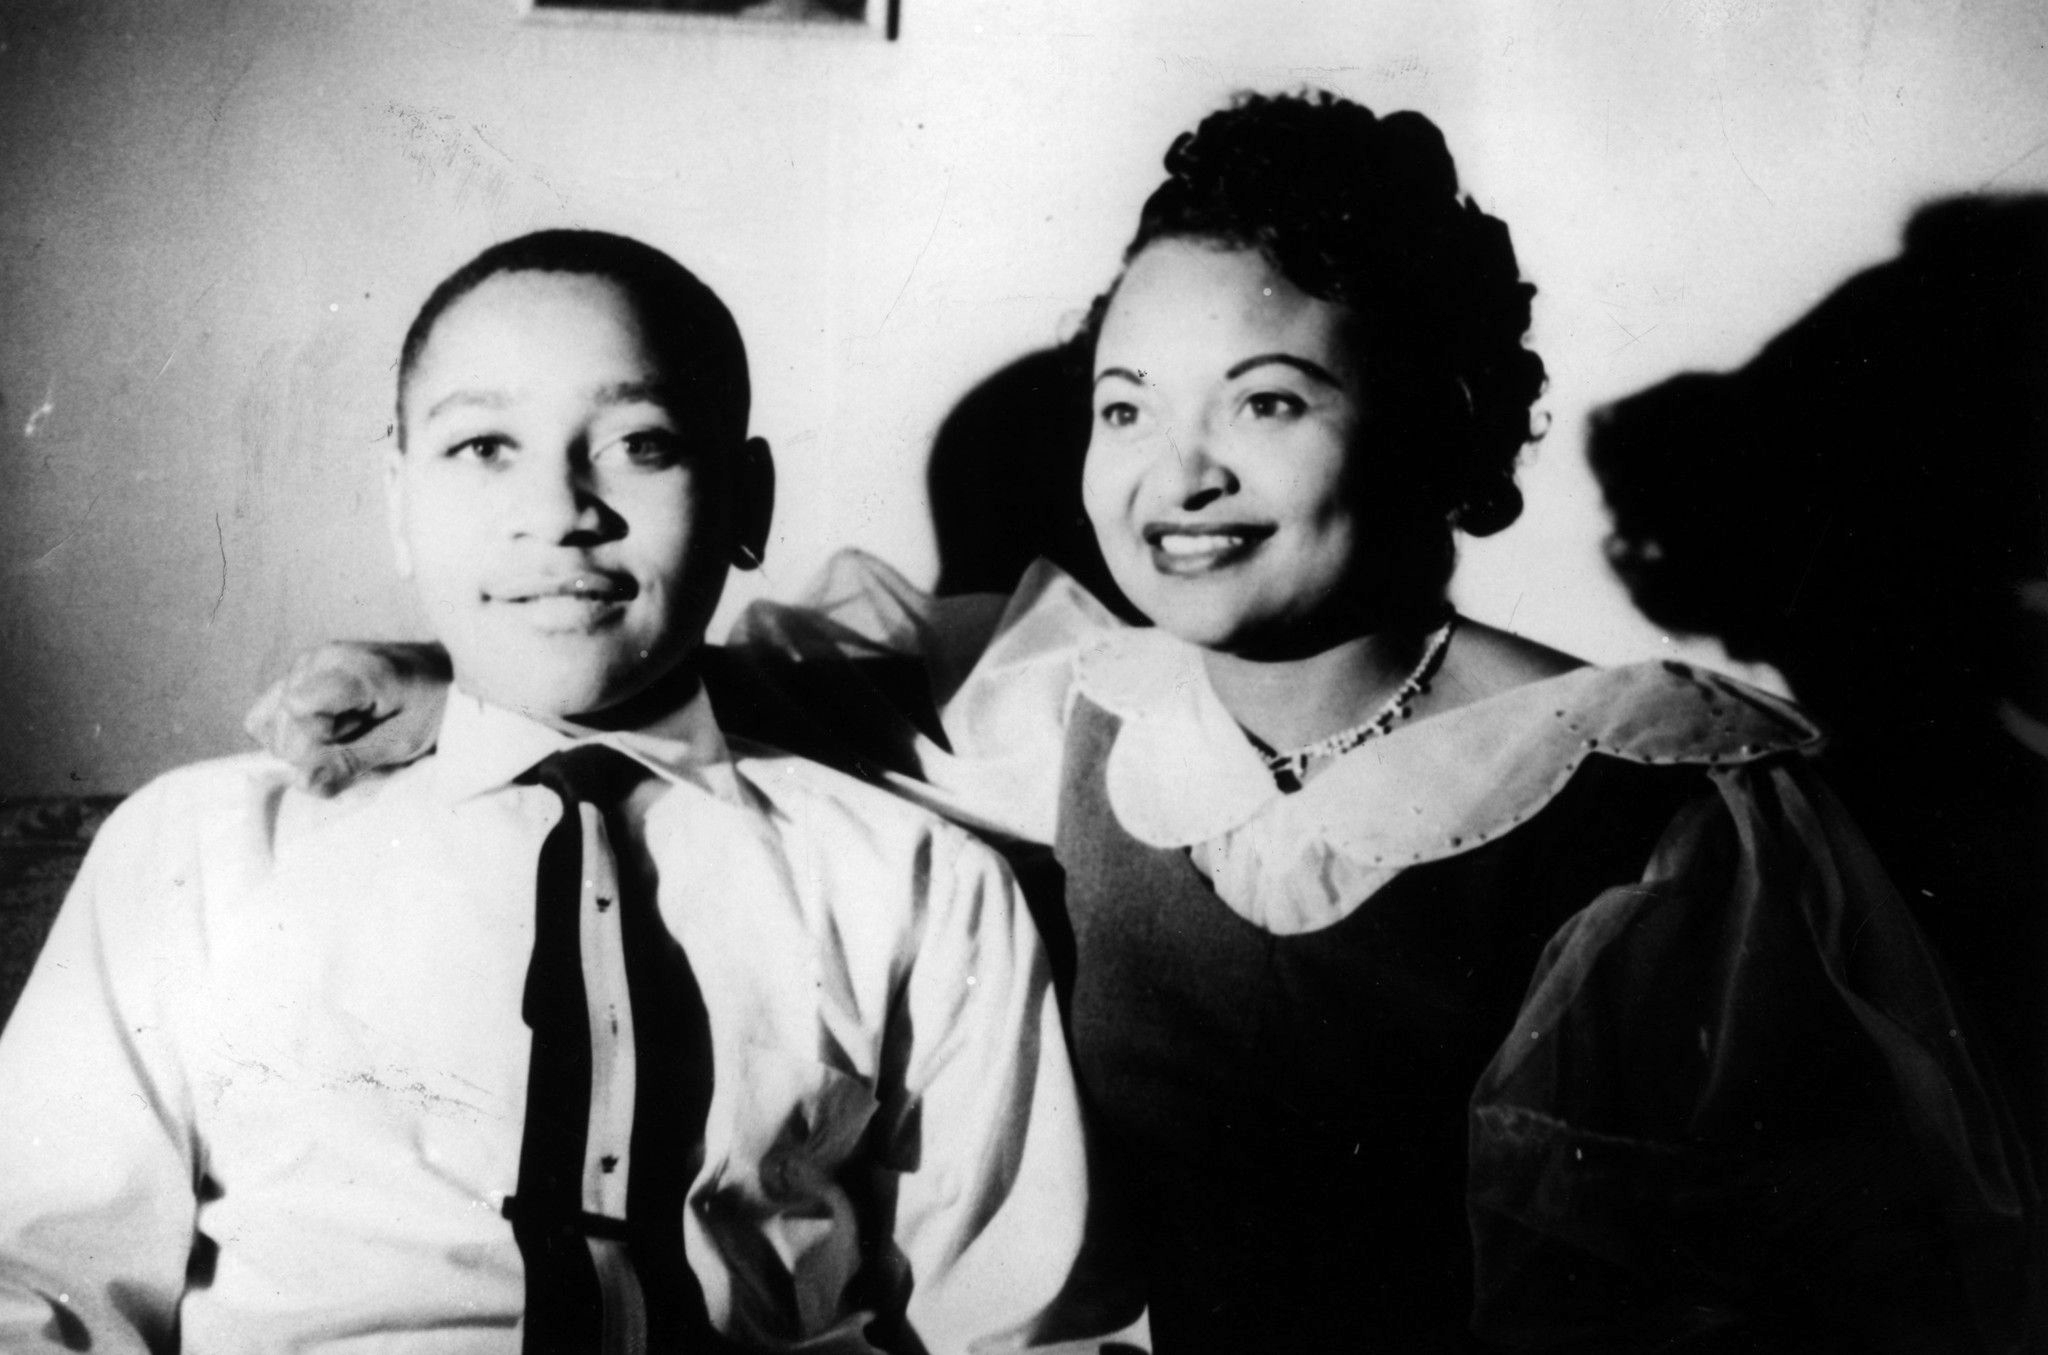 PHOTO: Emmett Louis Till, 14, with his mother, Mamie Till-Mobley, at home in Chicago.